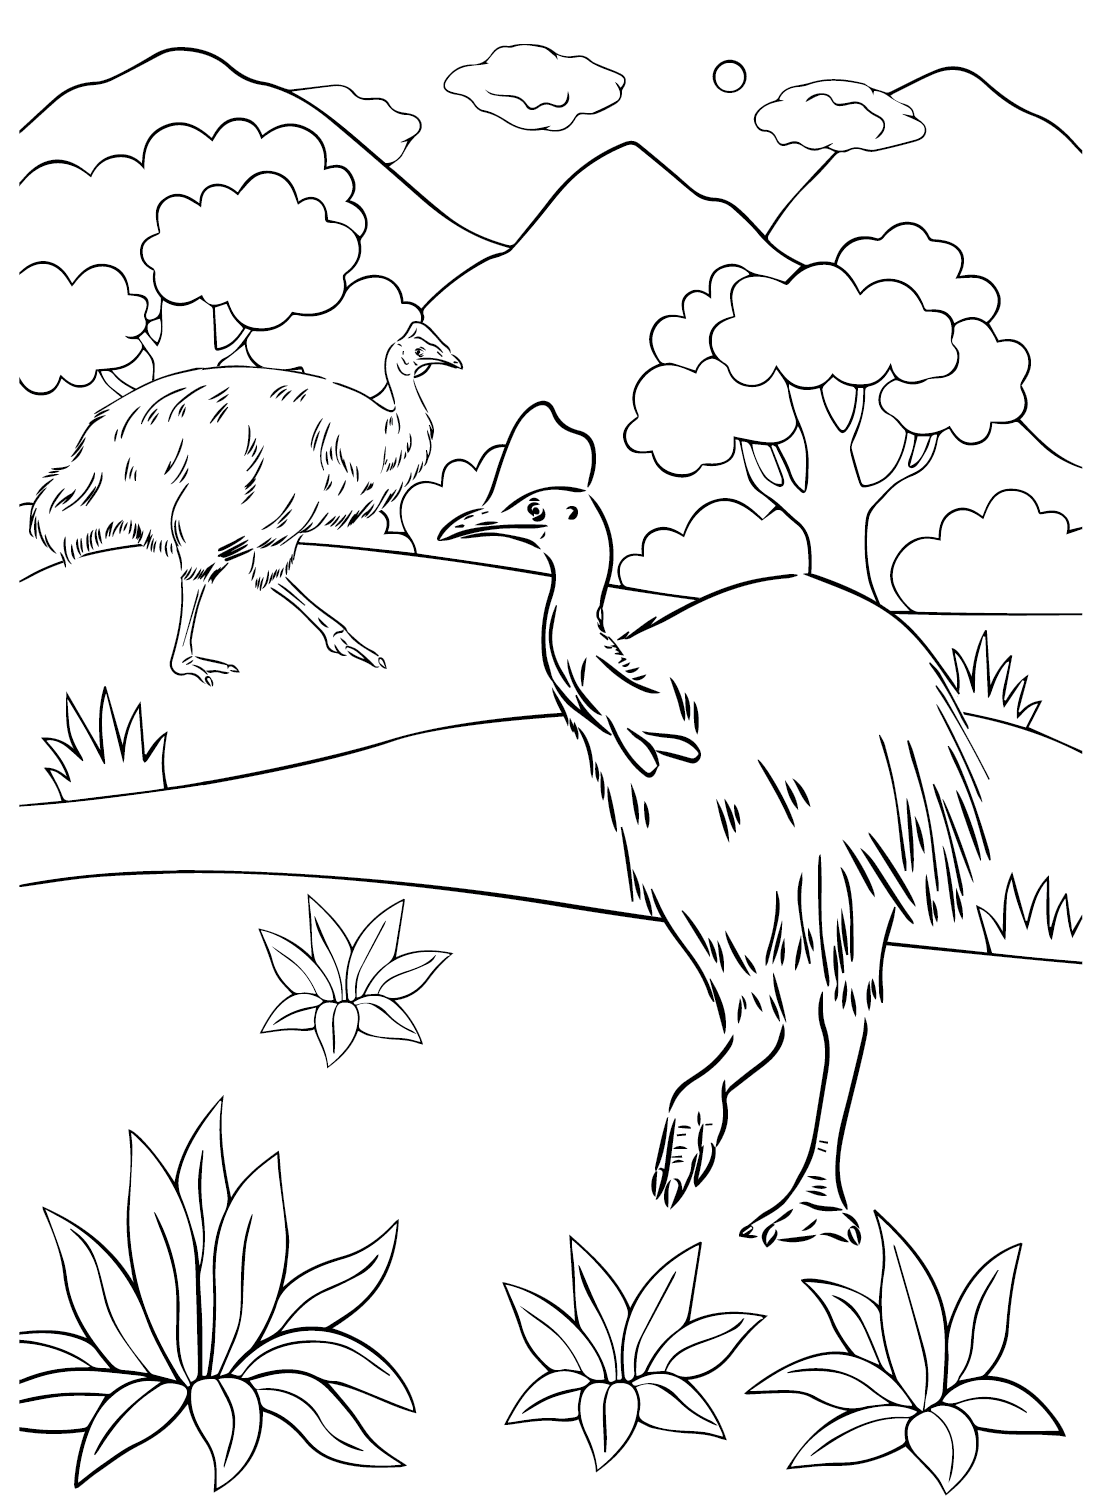 Cassowary Coloring Pages to Download from Cassowary